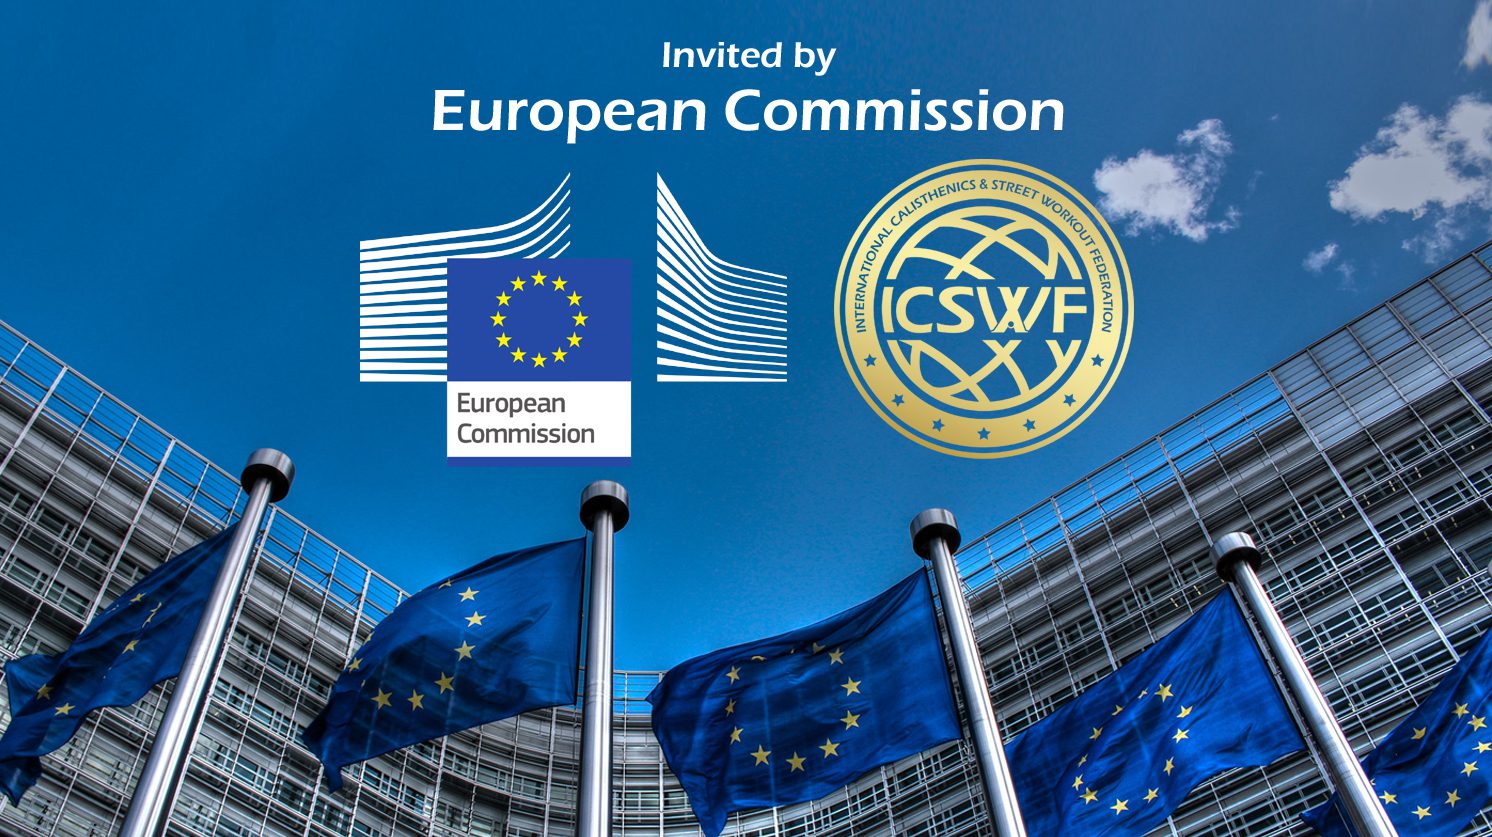 ICSWF invited by European Commission